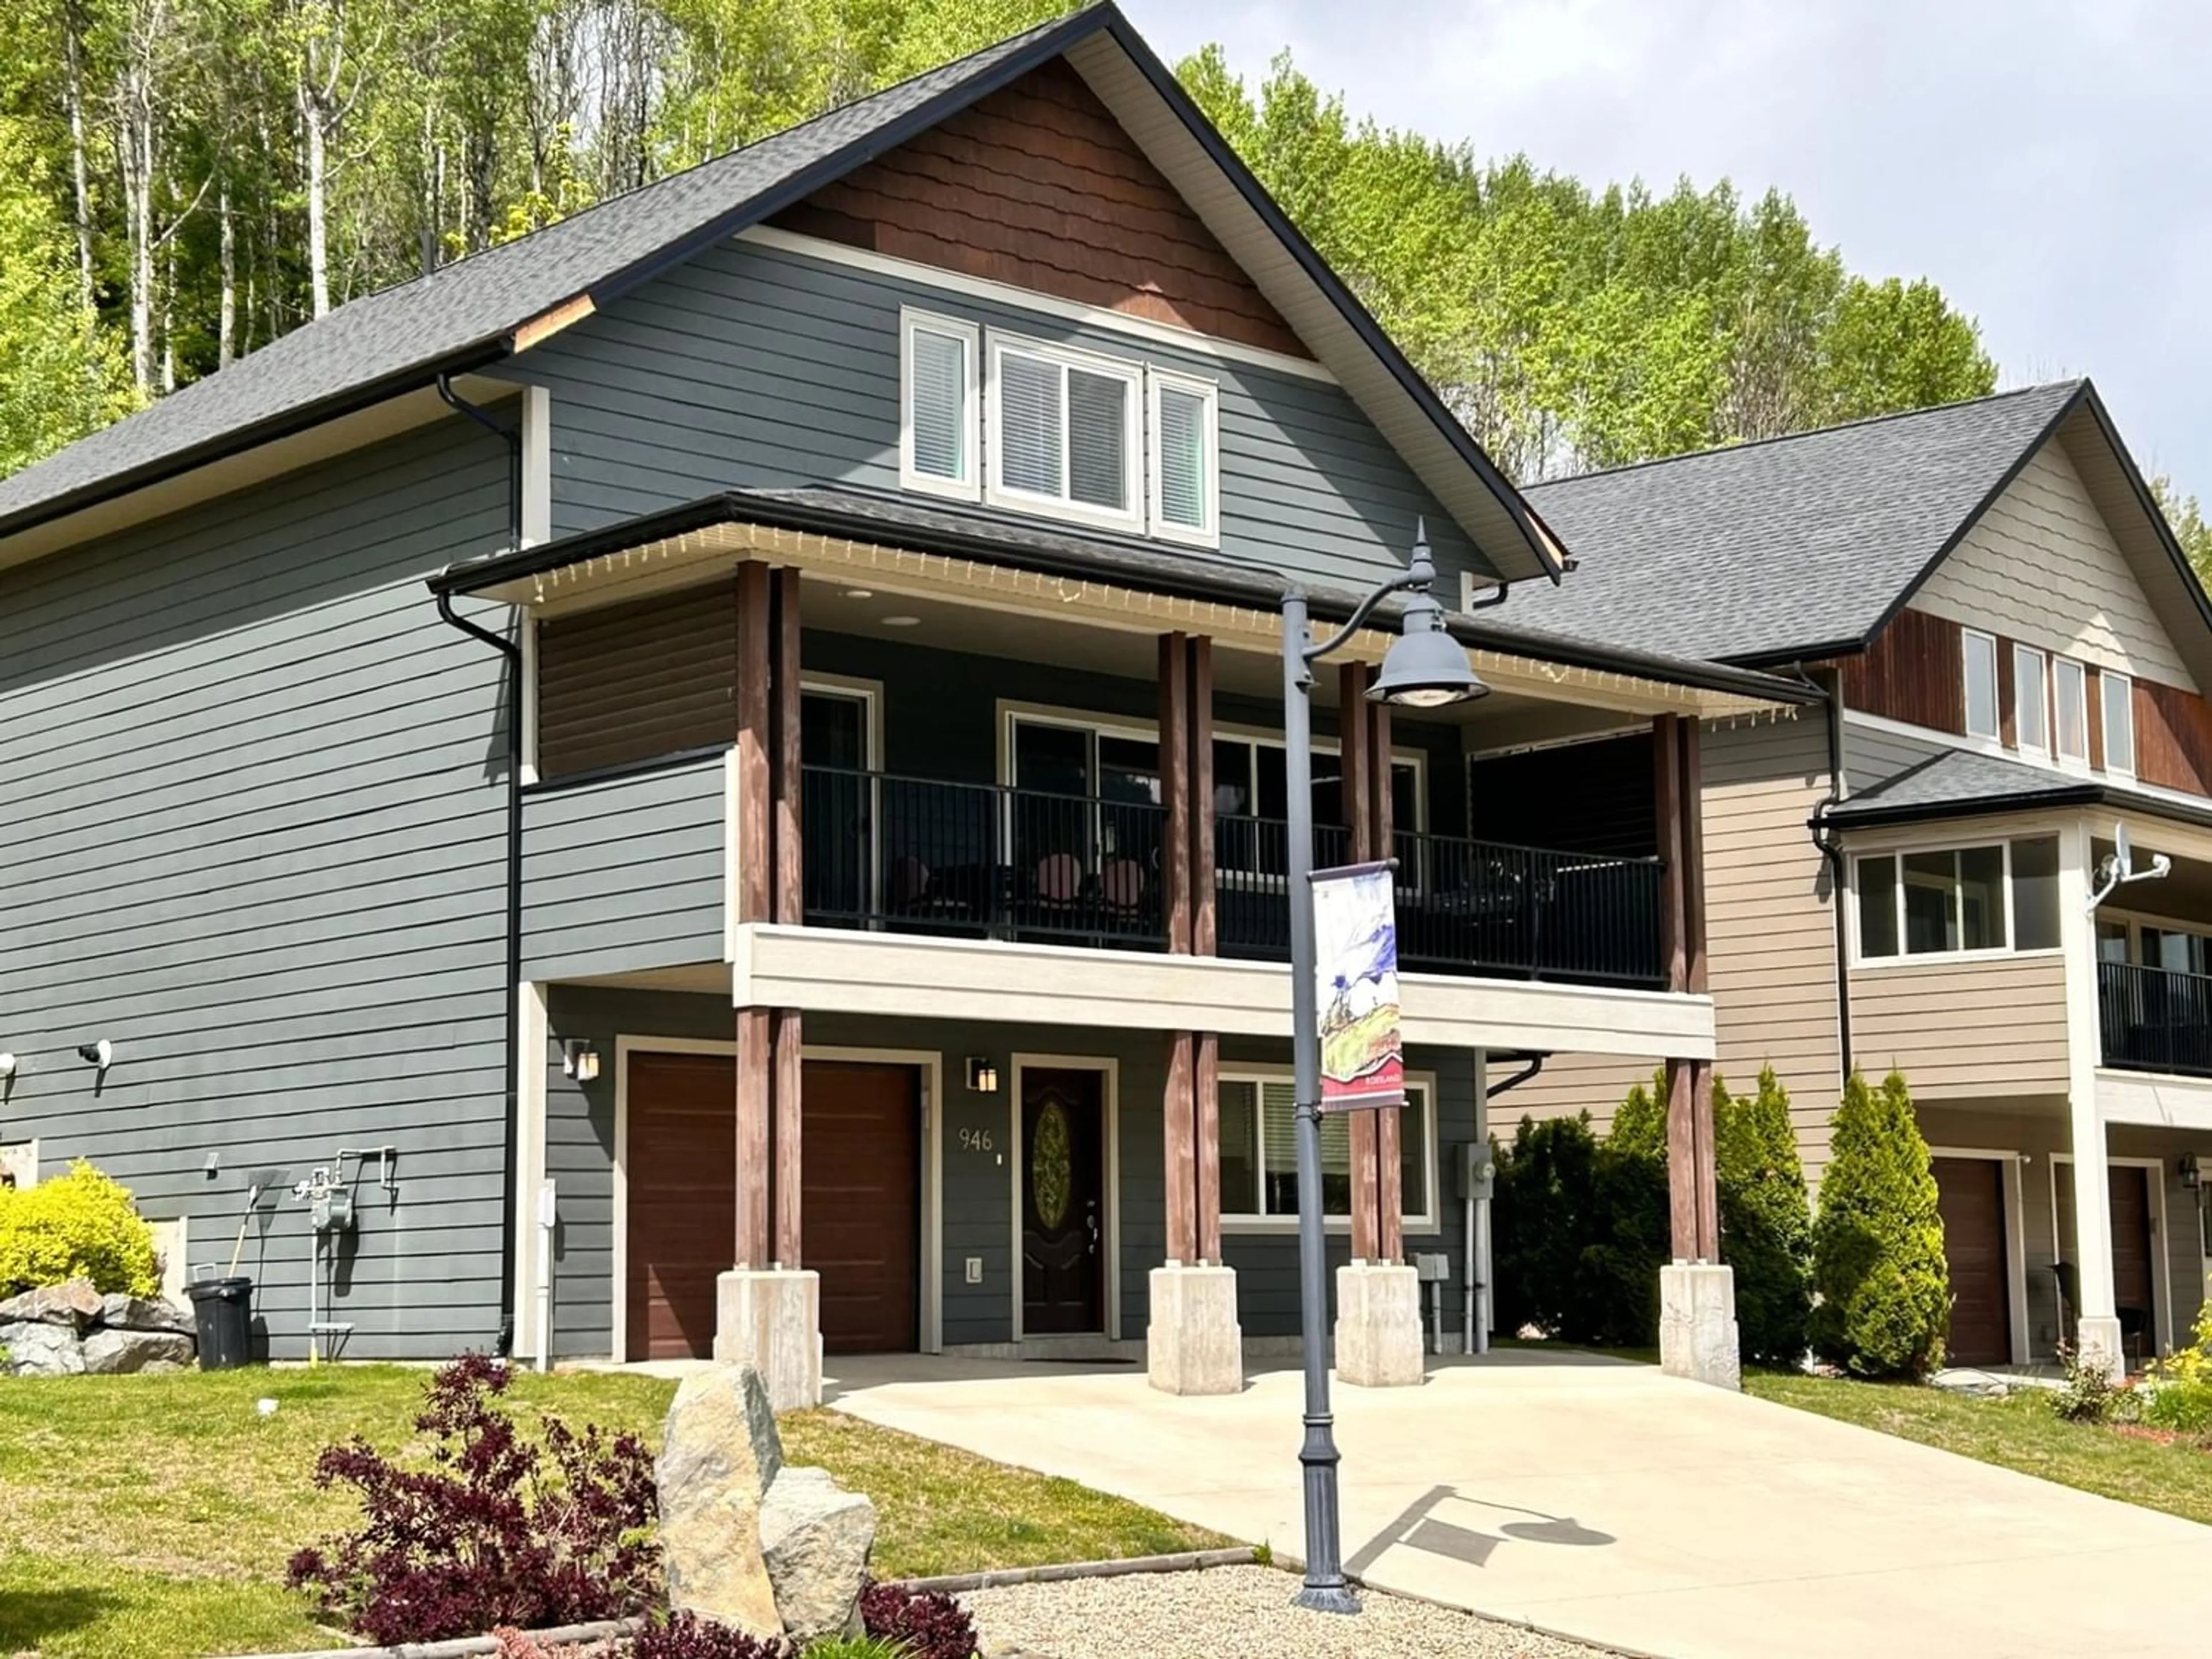 Outside view for 946 REDSTONE DRIVE, Rossland British Columbia V0G1Y0